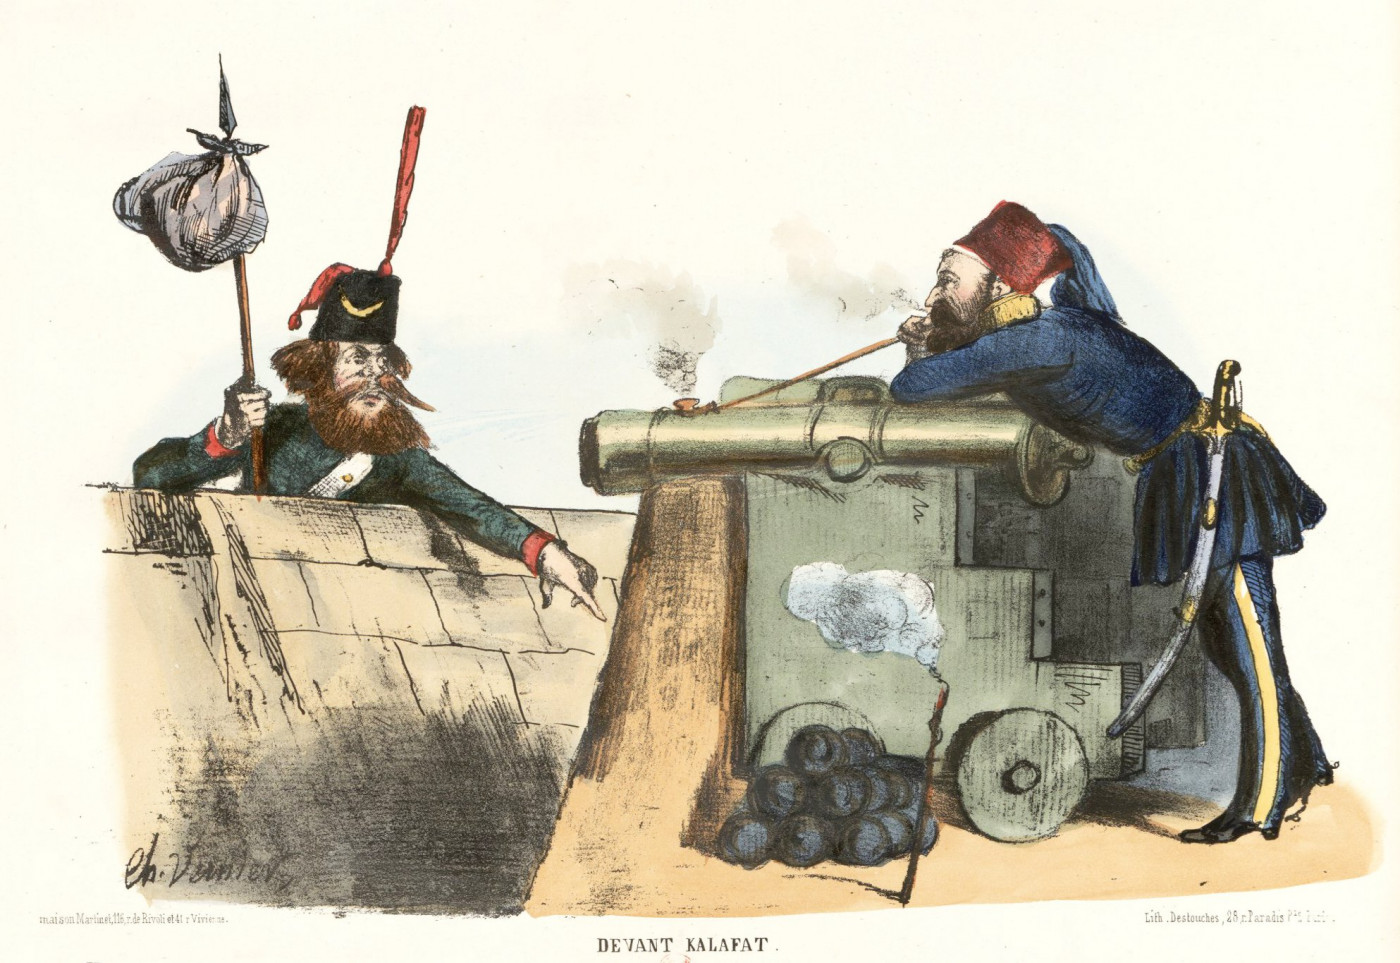 A French view of the Crimean War in 1854